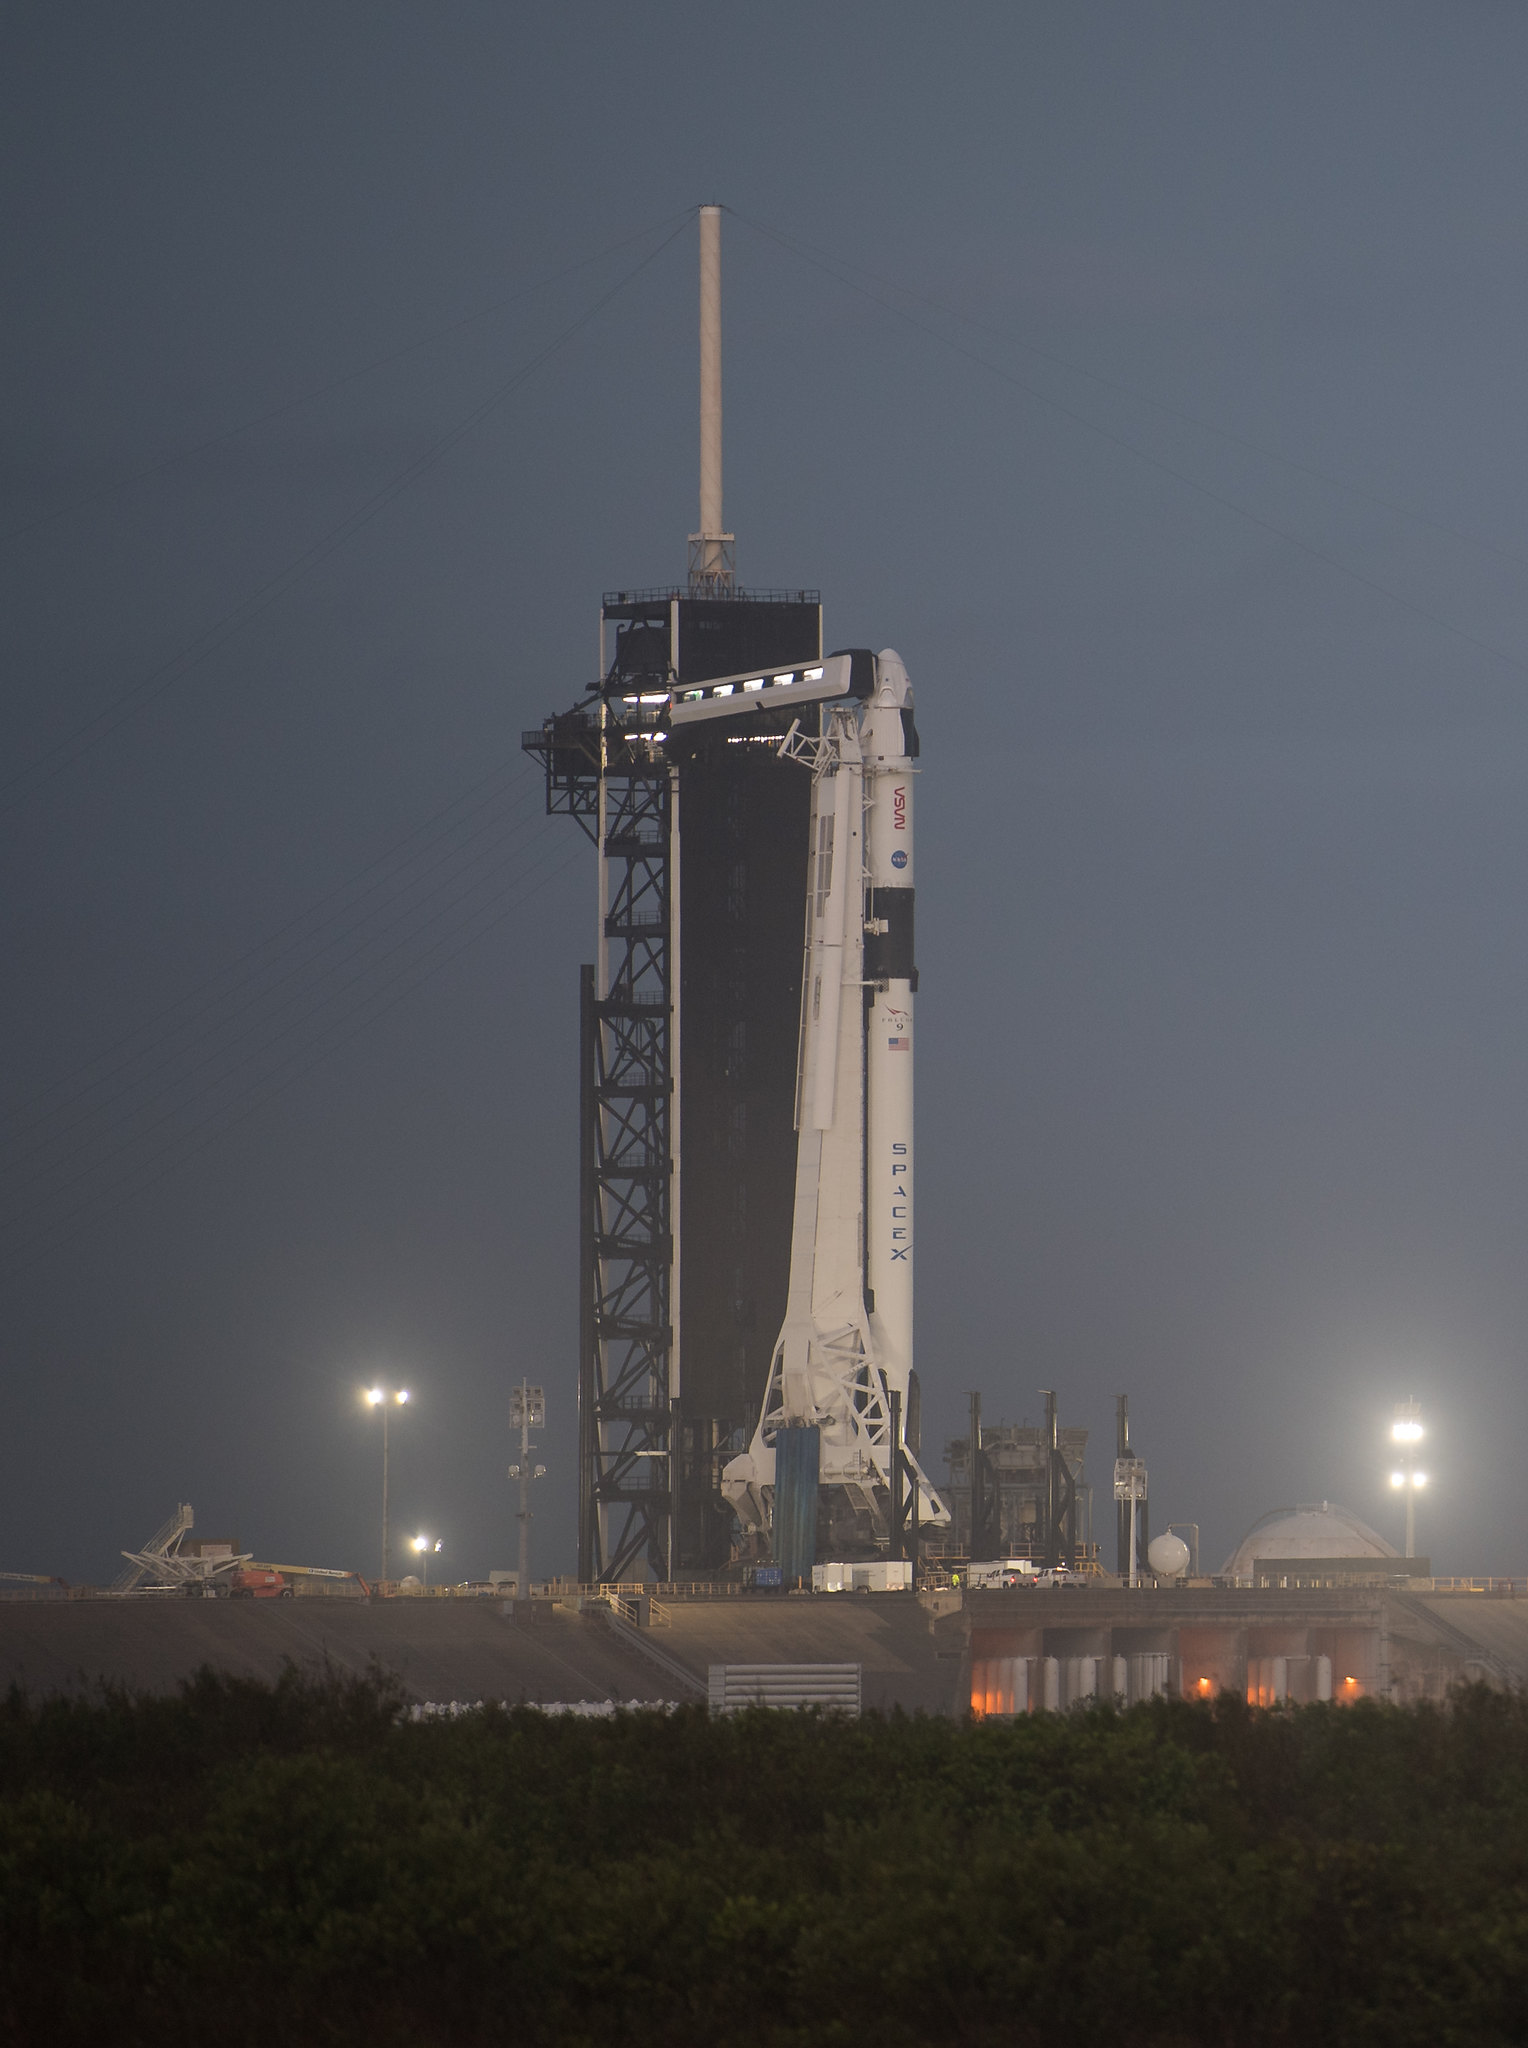 SpaceX Falcon 9 rocket with the Crew Dragon spacecraft for the Crew-1 mission